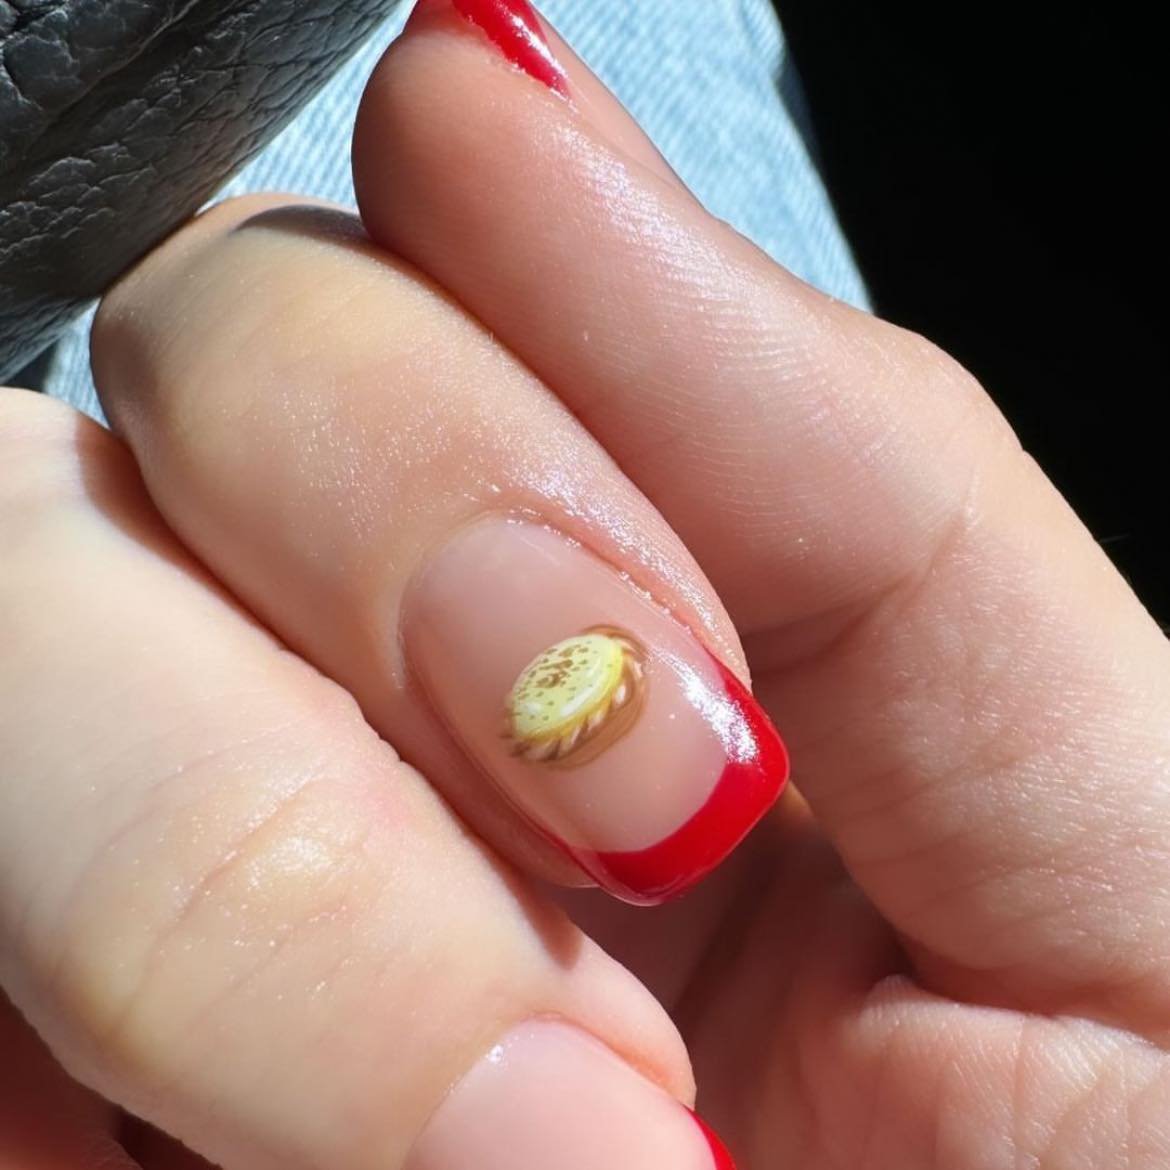 The miniature artist strikes again! 
The smallest custard tart that ever was painted.
By Sheridan #nailart #artist